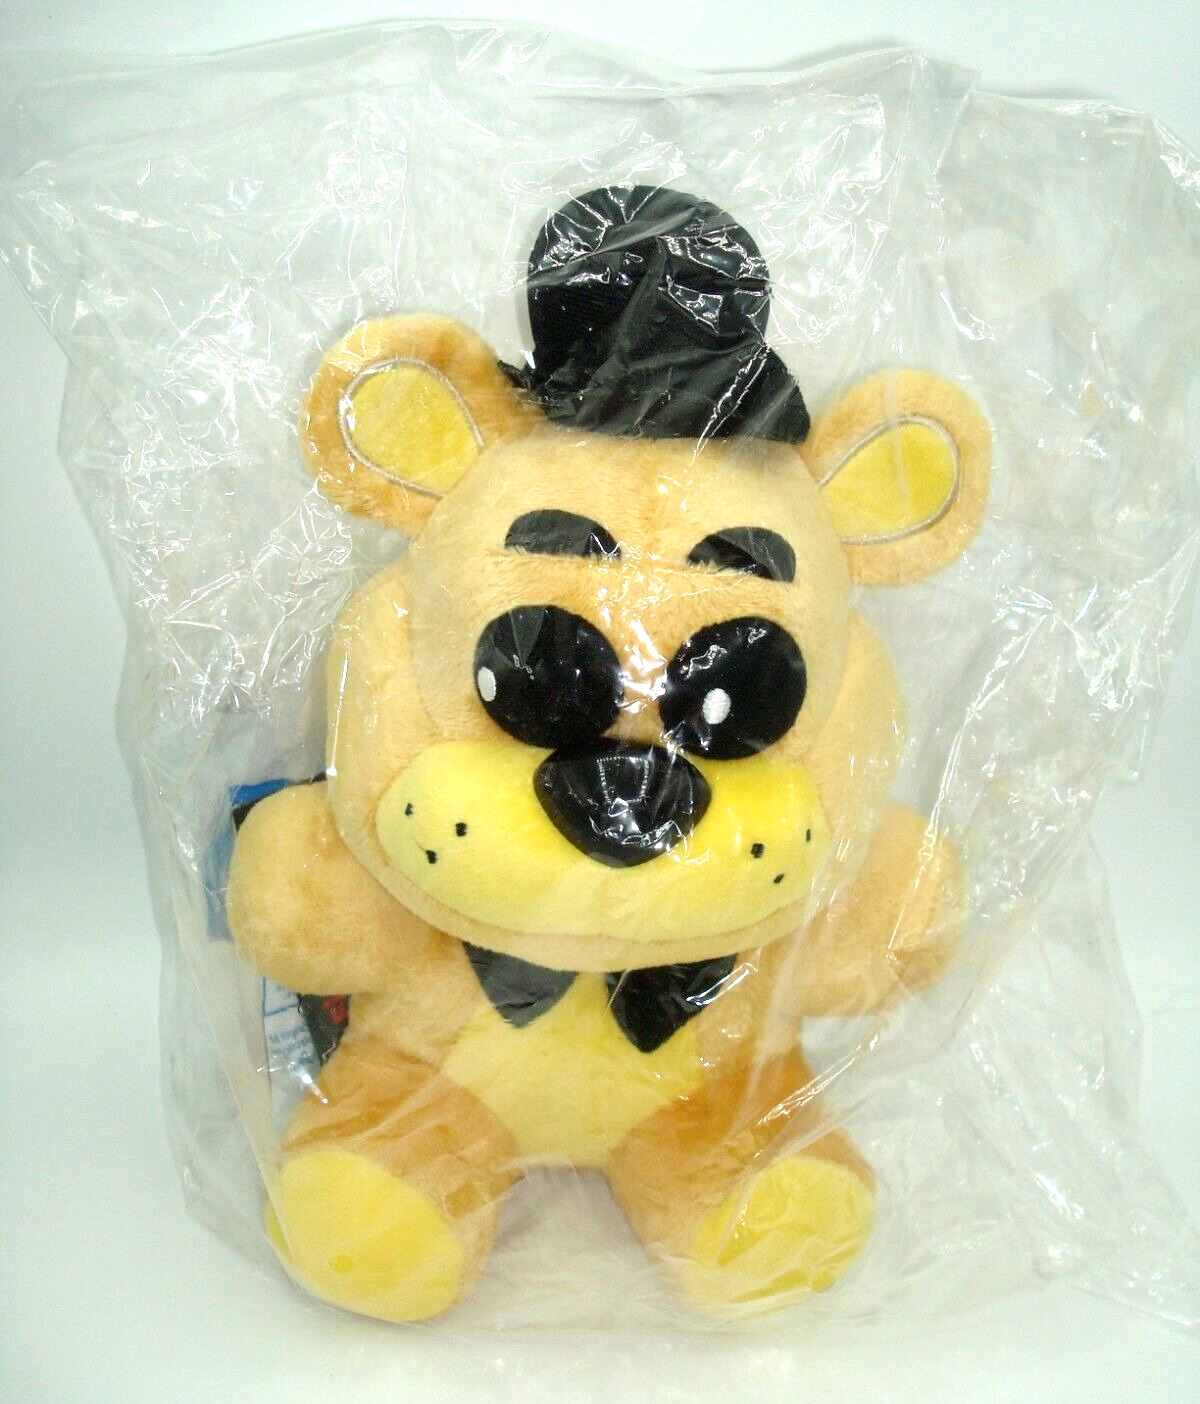 OFFICIAL SANSHEE FNAF GOLDEN FREDDY PLUSH FIVE NIGHTS AT FREDDY\'S NEW SOLD OUT